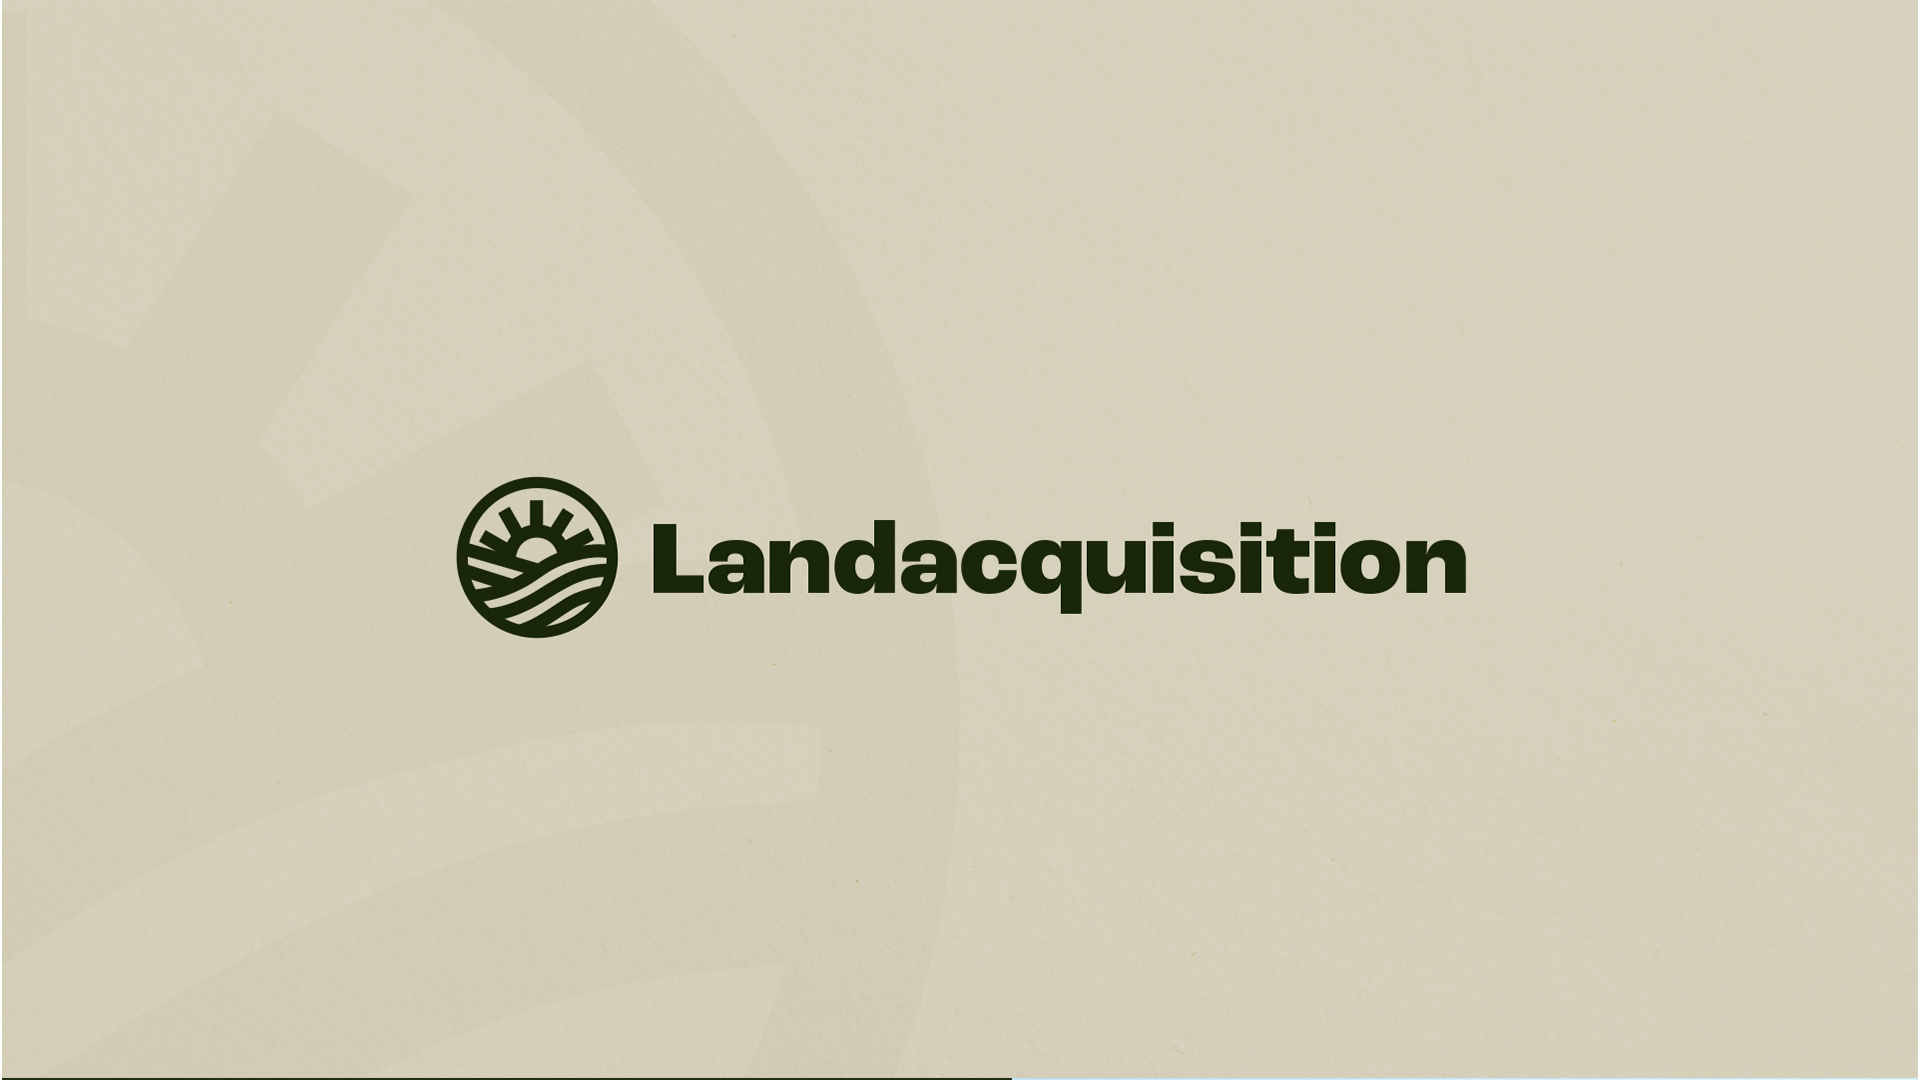 A Fresh Brand Identity for Landacquisition a Agriculture Proptech